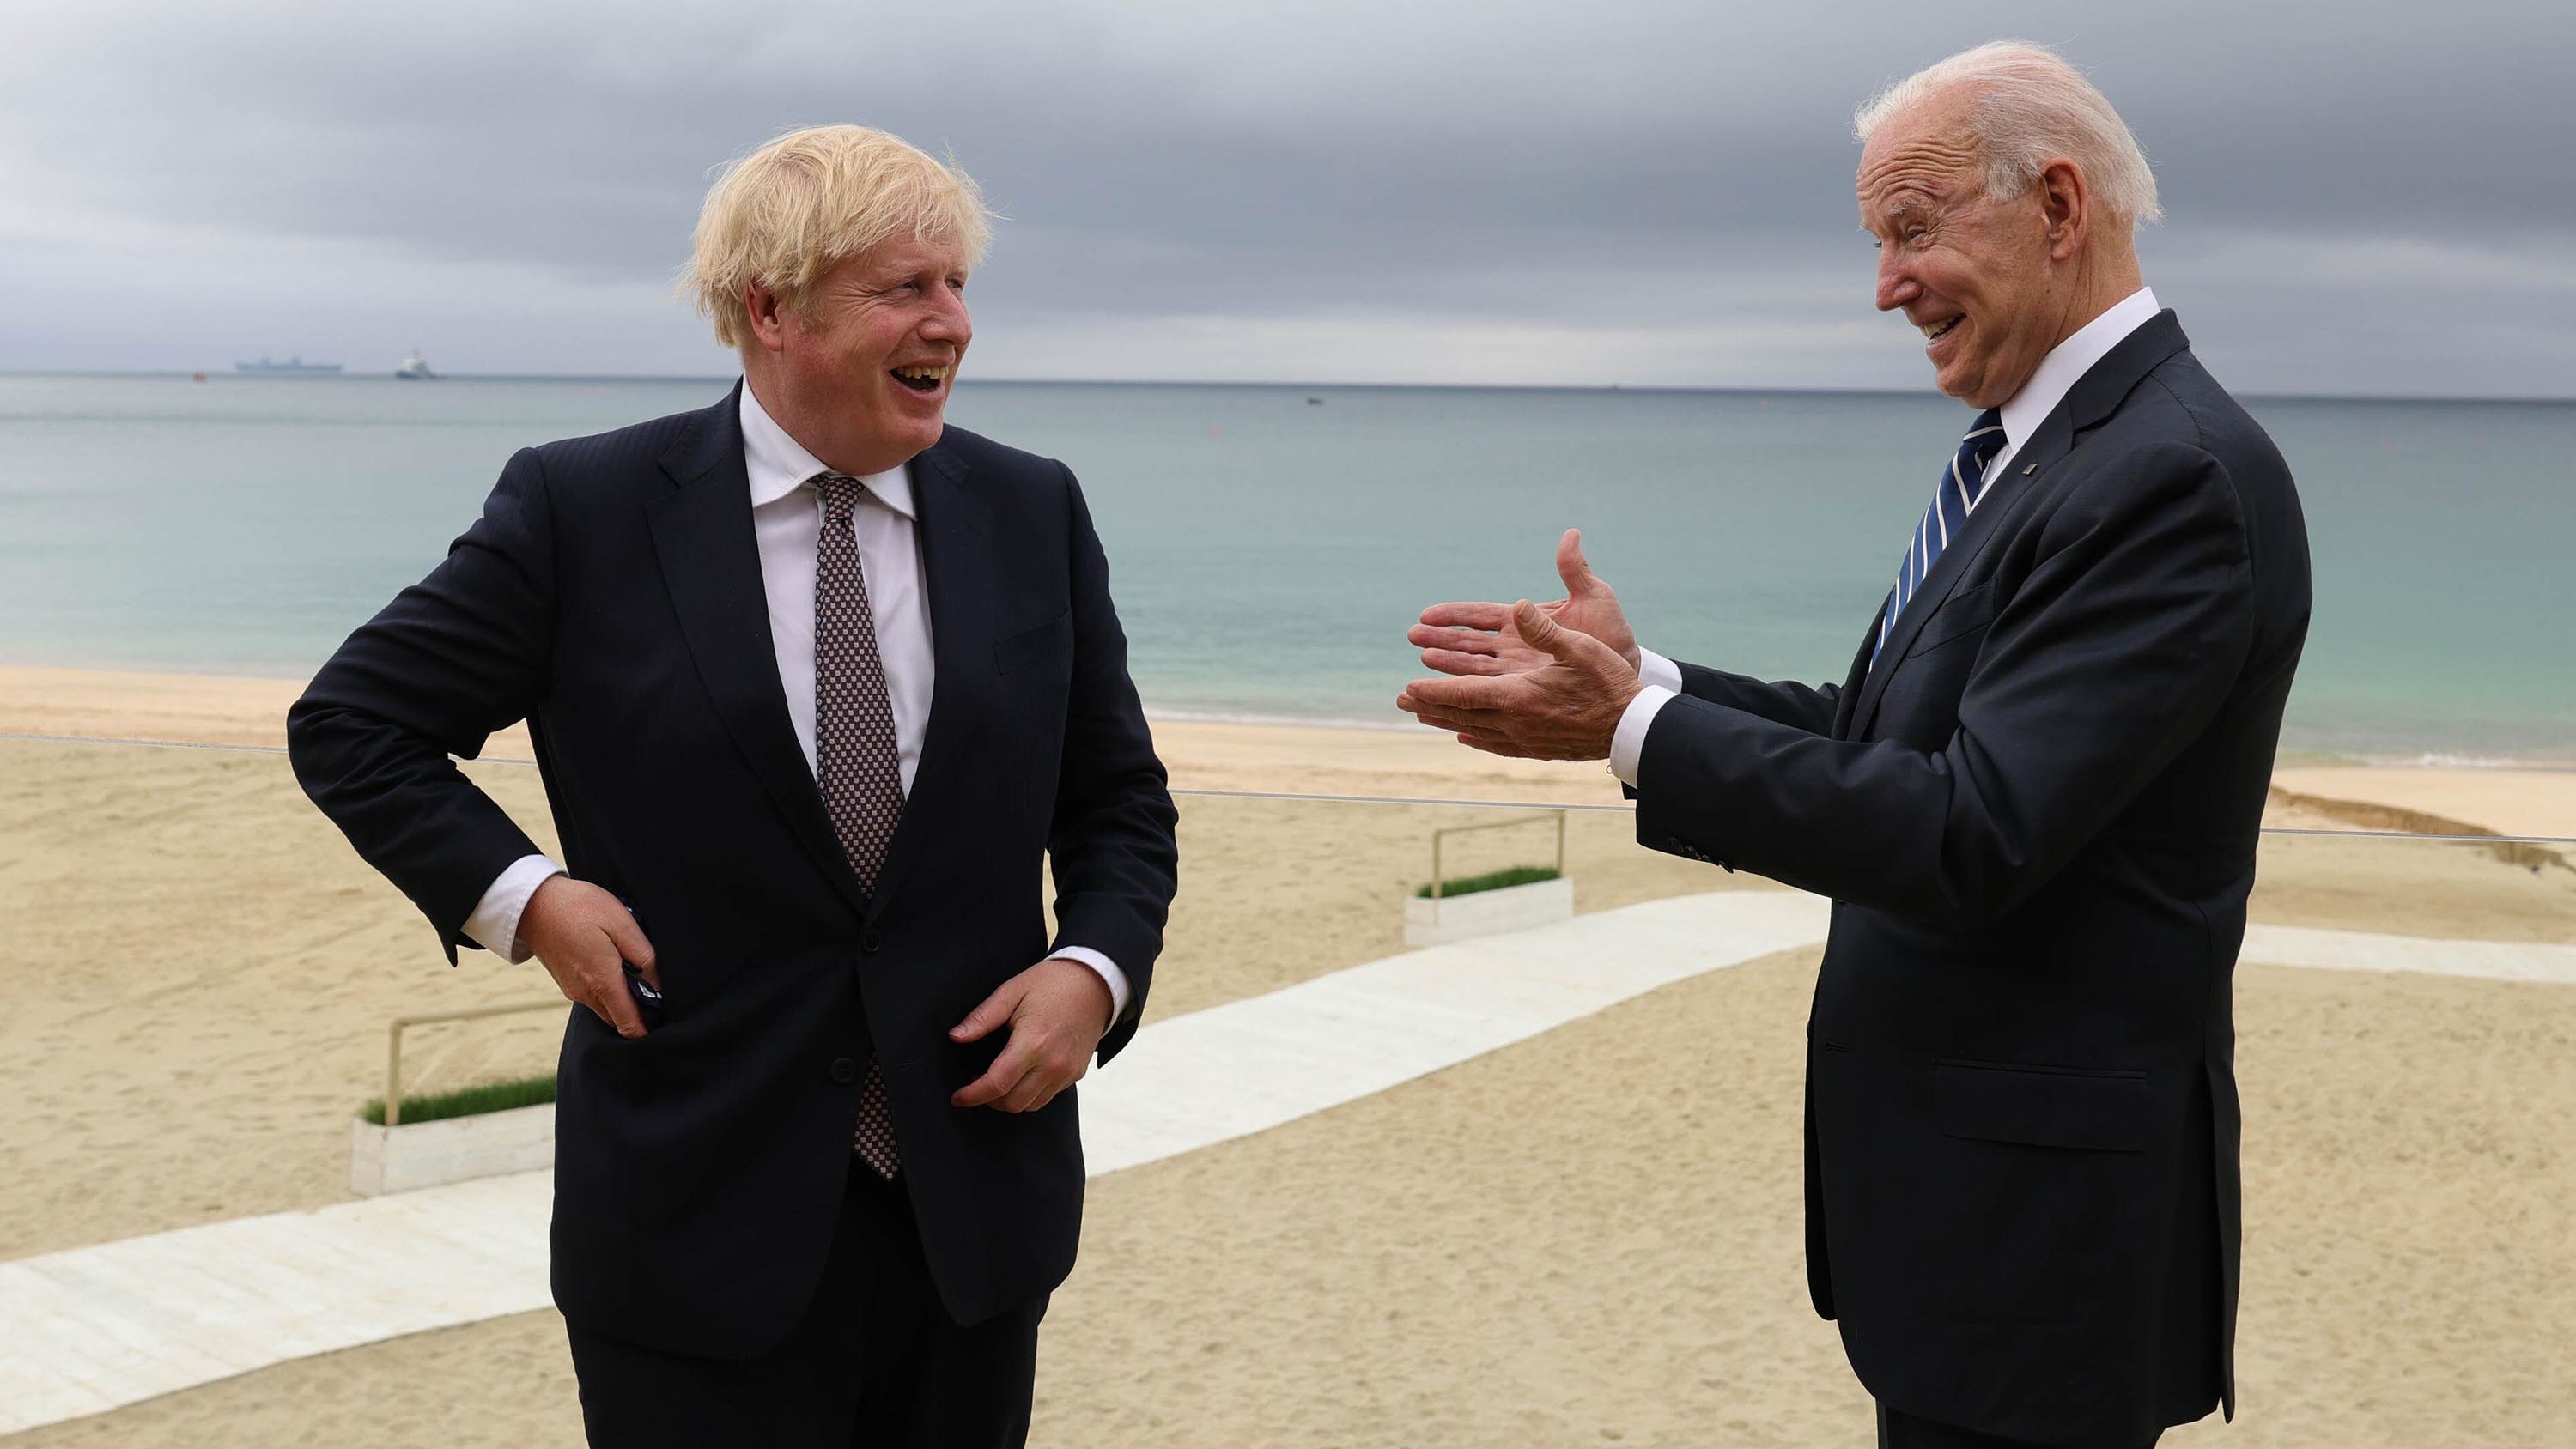 Johnson and US President Joe Biden speak at Carbis Bay in Cornwall, England, after their bilateral meeting in June 2021. Biden and Johnson were participating in the G7 summit that weekend.